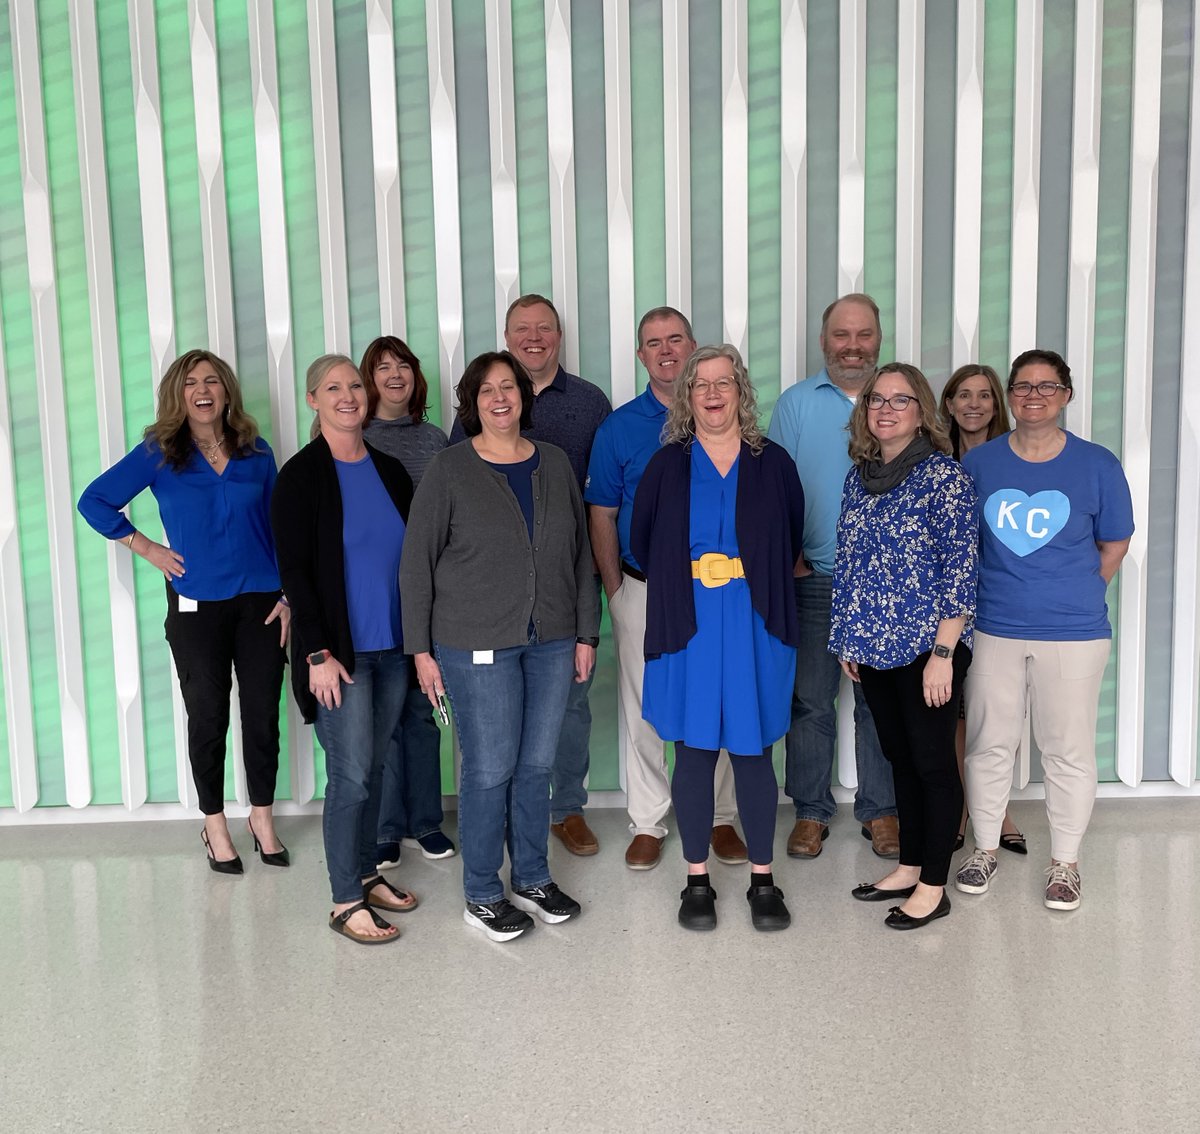 Our associates recently went blue in recognition of World Autism Day to help increase awareness, acceptance & support of autistic individuals. Learn more about American Century Investments' culture at: amcen.co/3TS4MRb #WorkatACI #DiscoverACI #JoinOurTeam #CompanyCulture